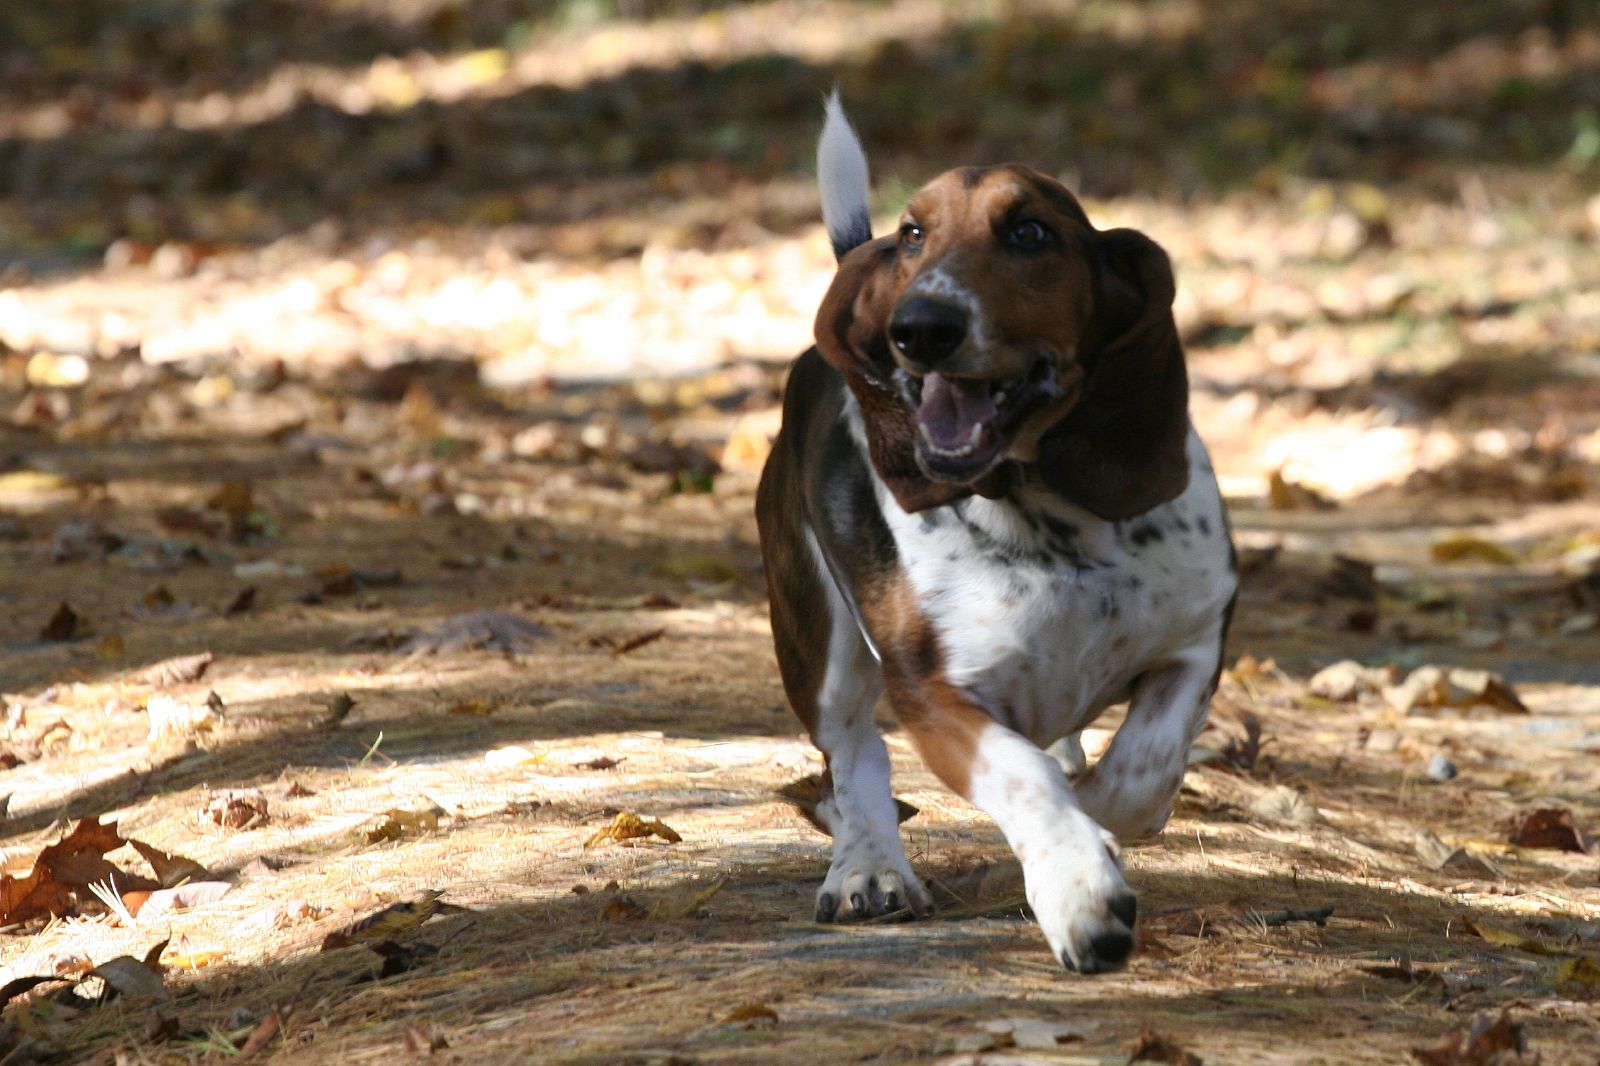 a brown and white dog running on dirt with leaves